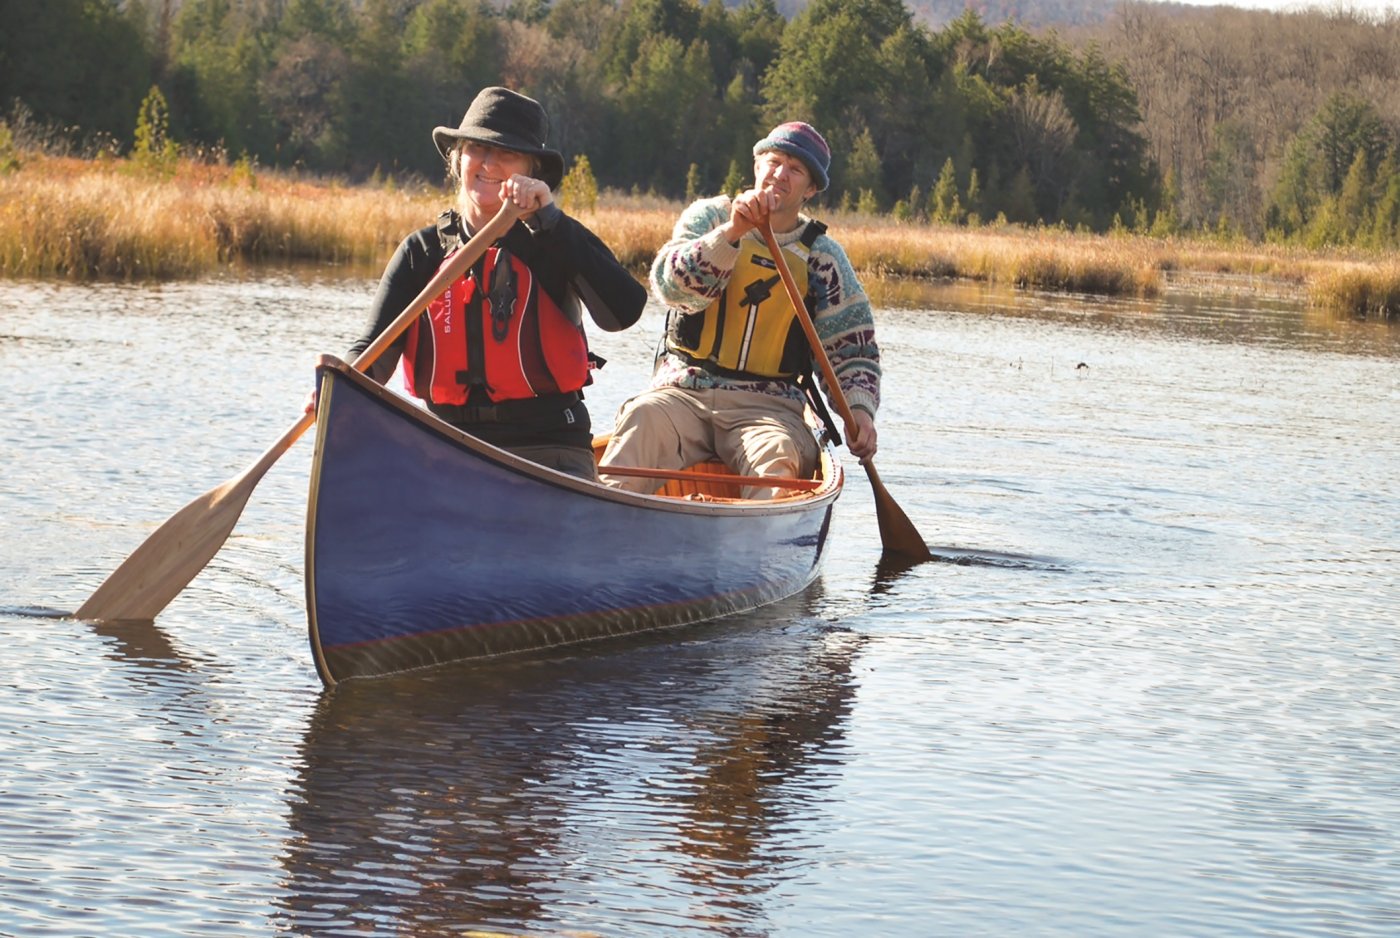 Two people paddling a canoe on open water.